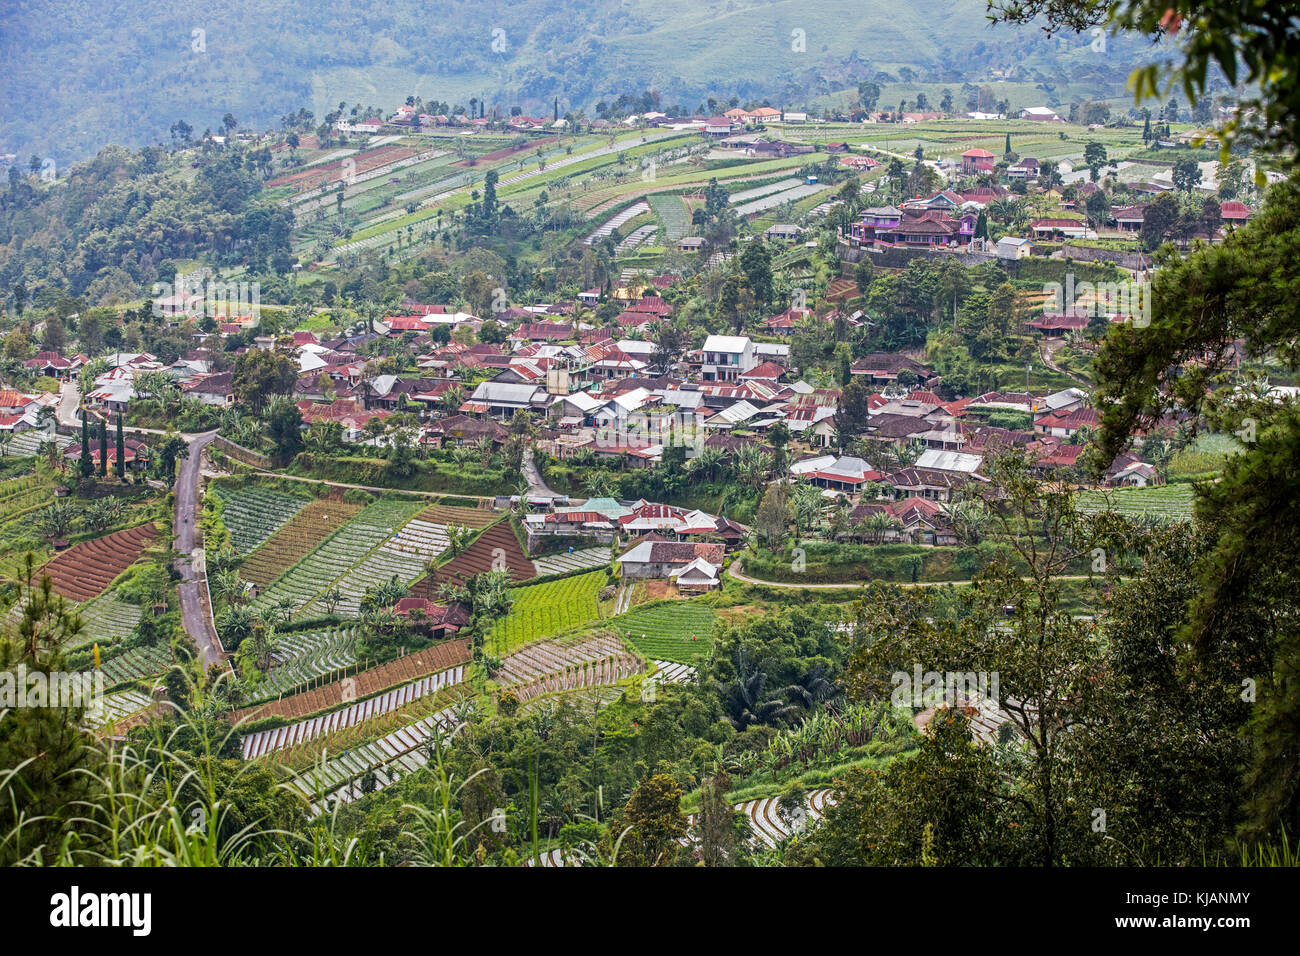 Village surrounded by terraced onion fields on the slopes of Mount Lawu / Gunung Lawu near Solo / Surakarta, Central Java, Indonesia Stock Photo